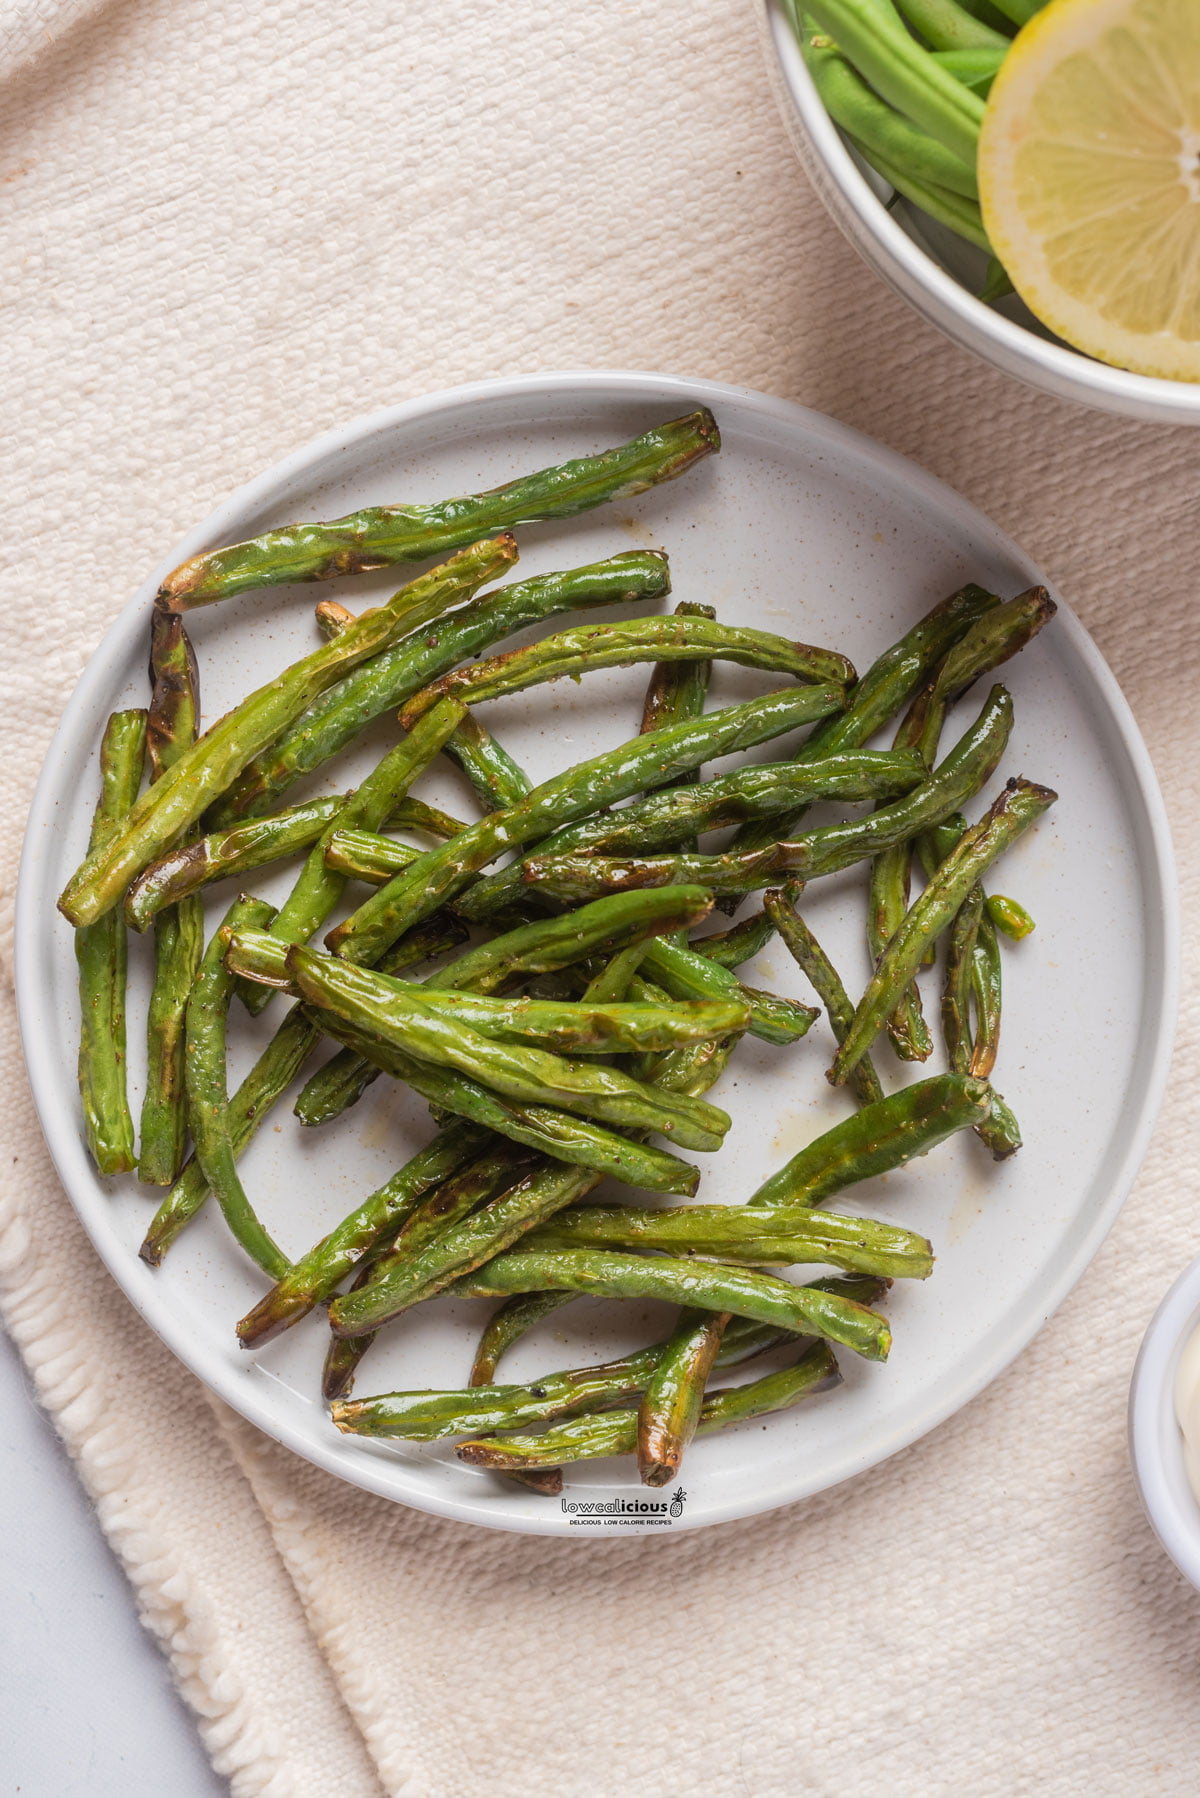 cooked Air Fryer Green Beans on a round white plate ready to serve